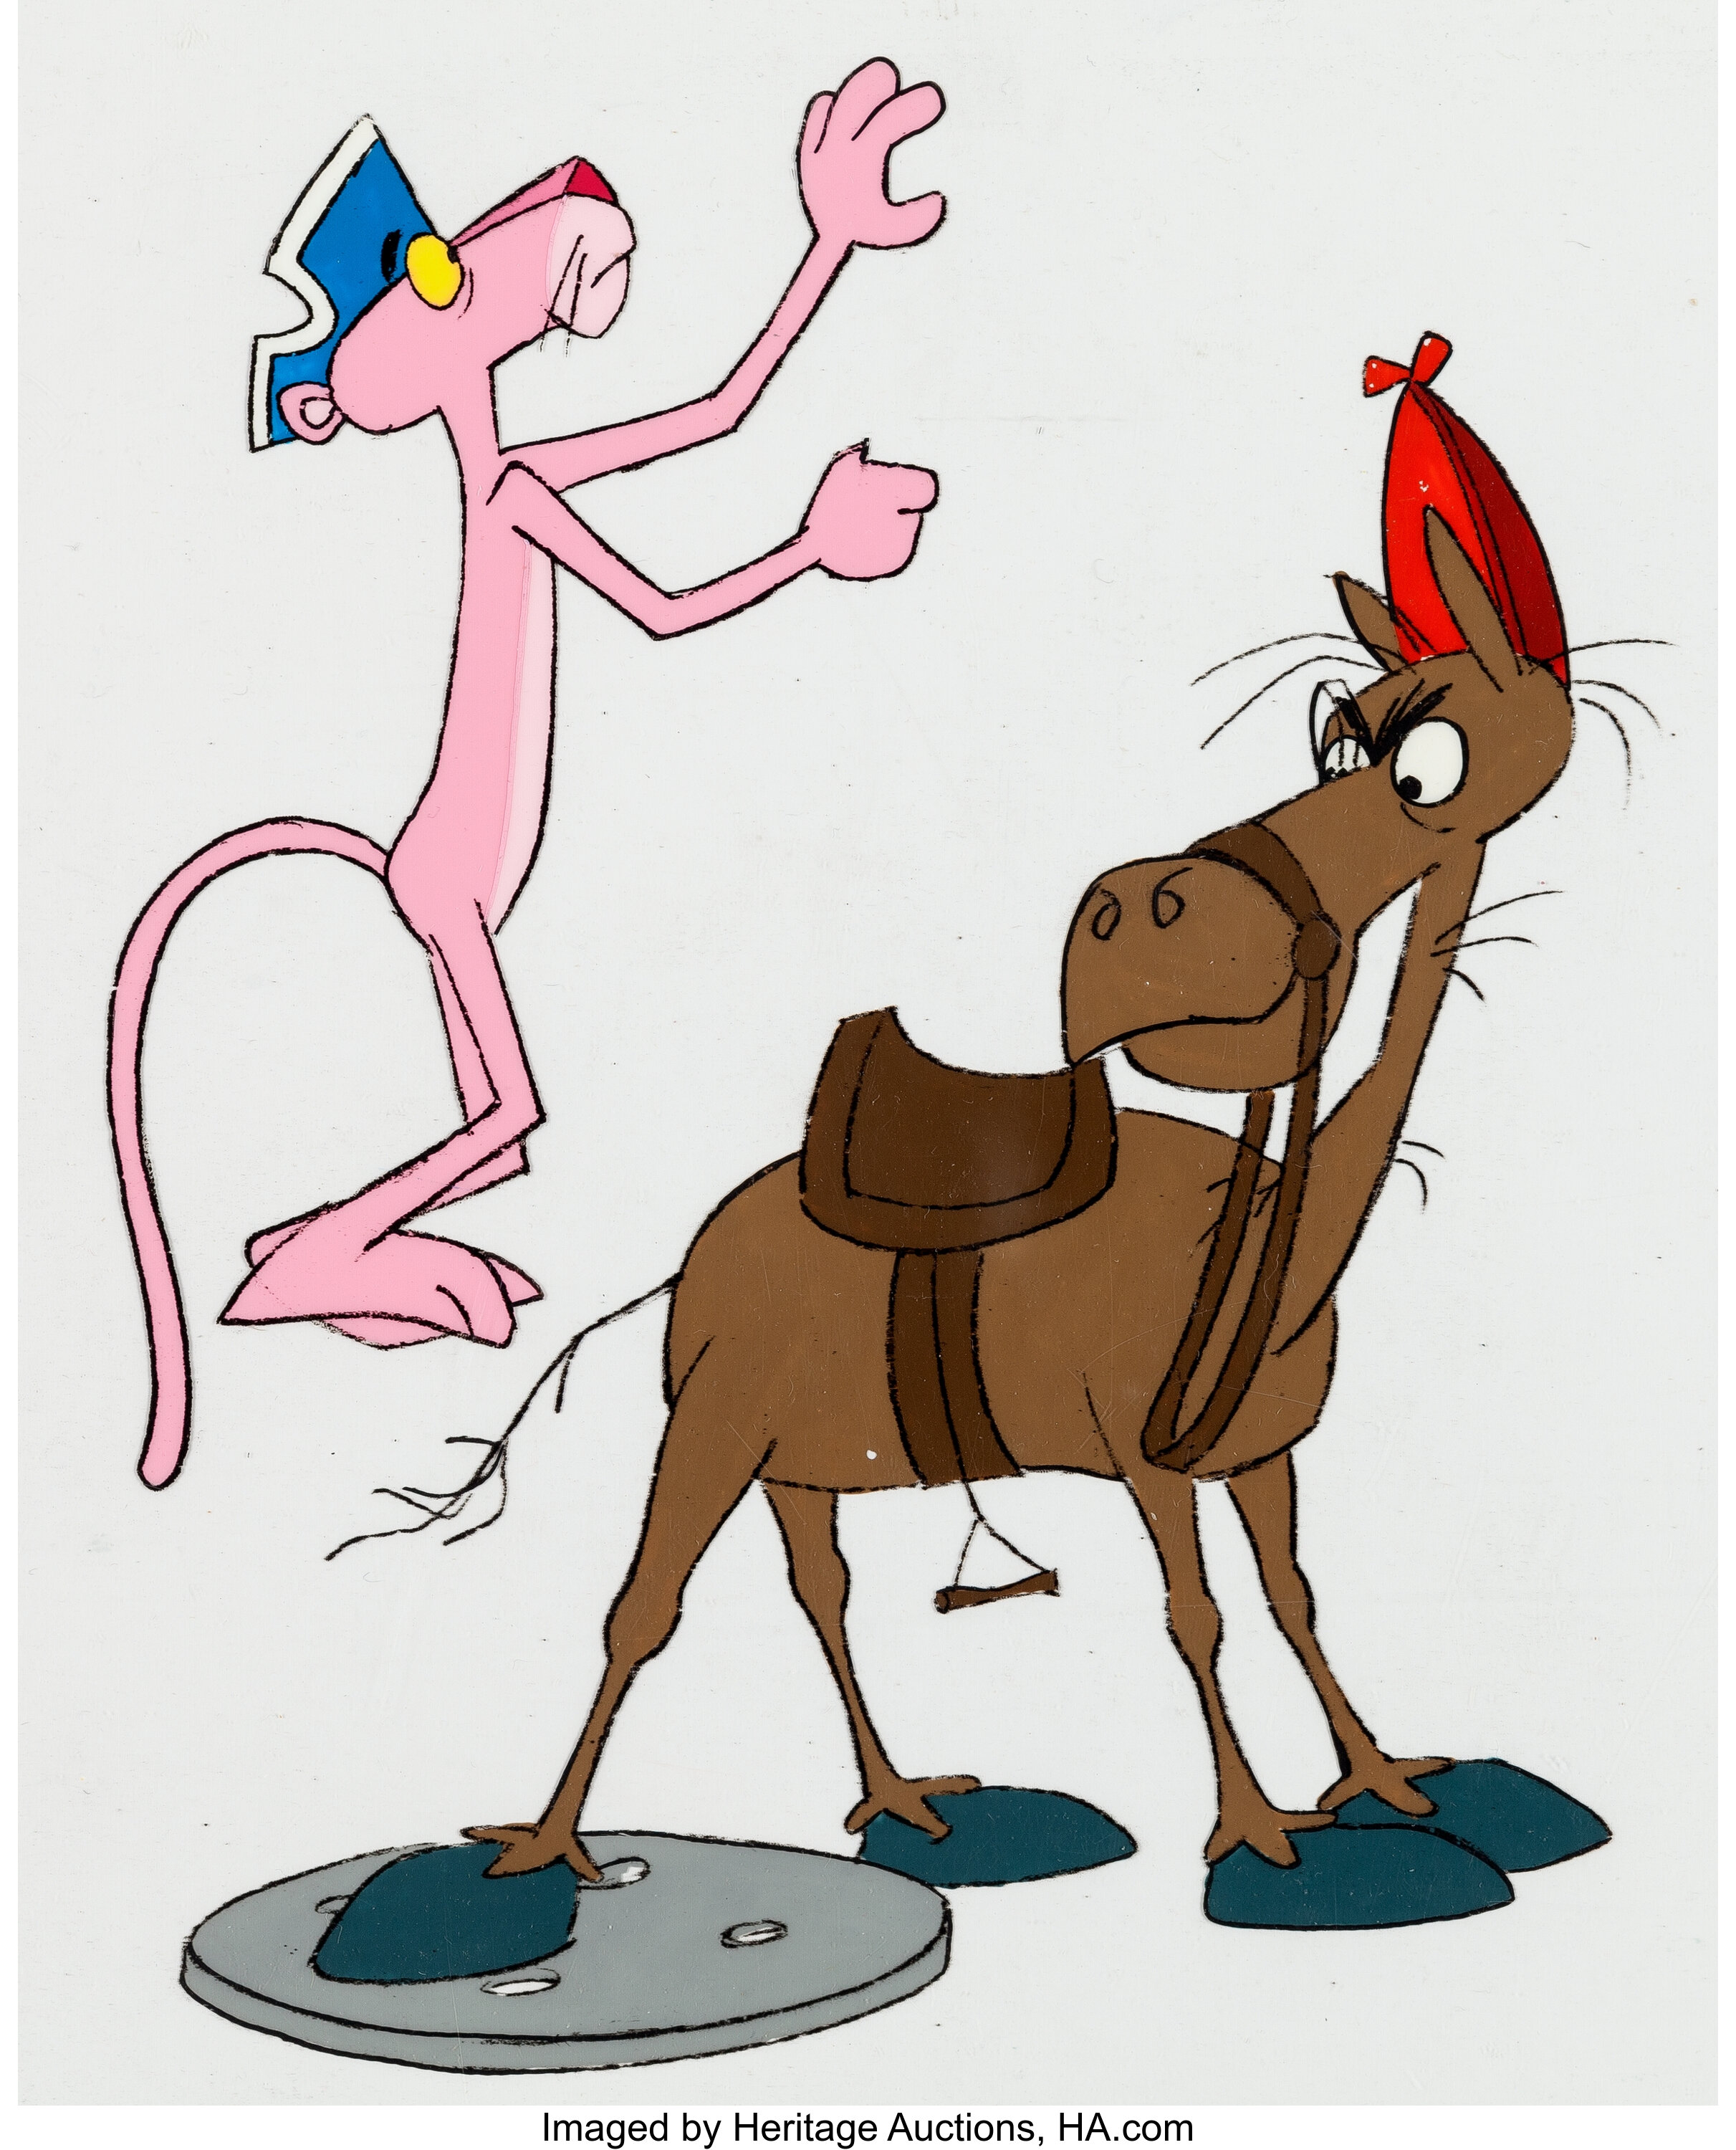 Pink Panther by cavaloalado - Fanart Central